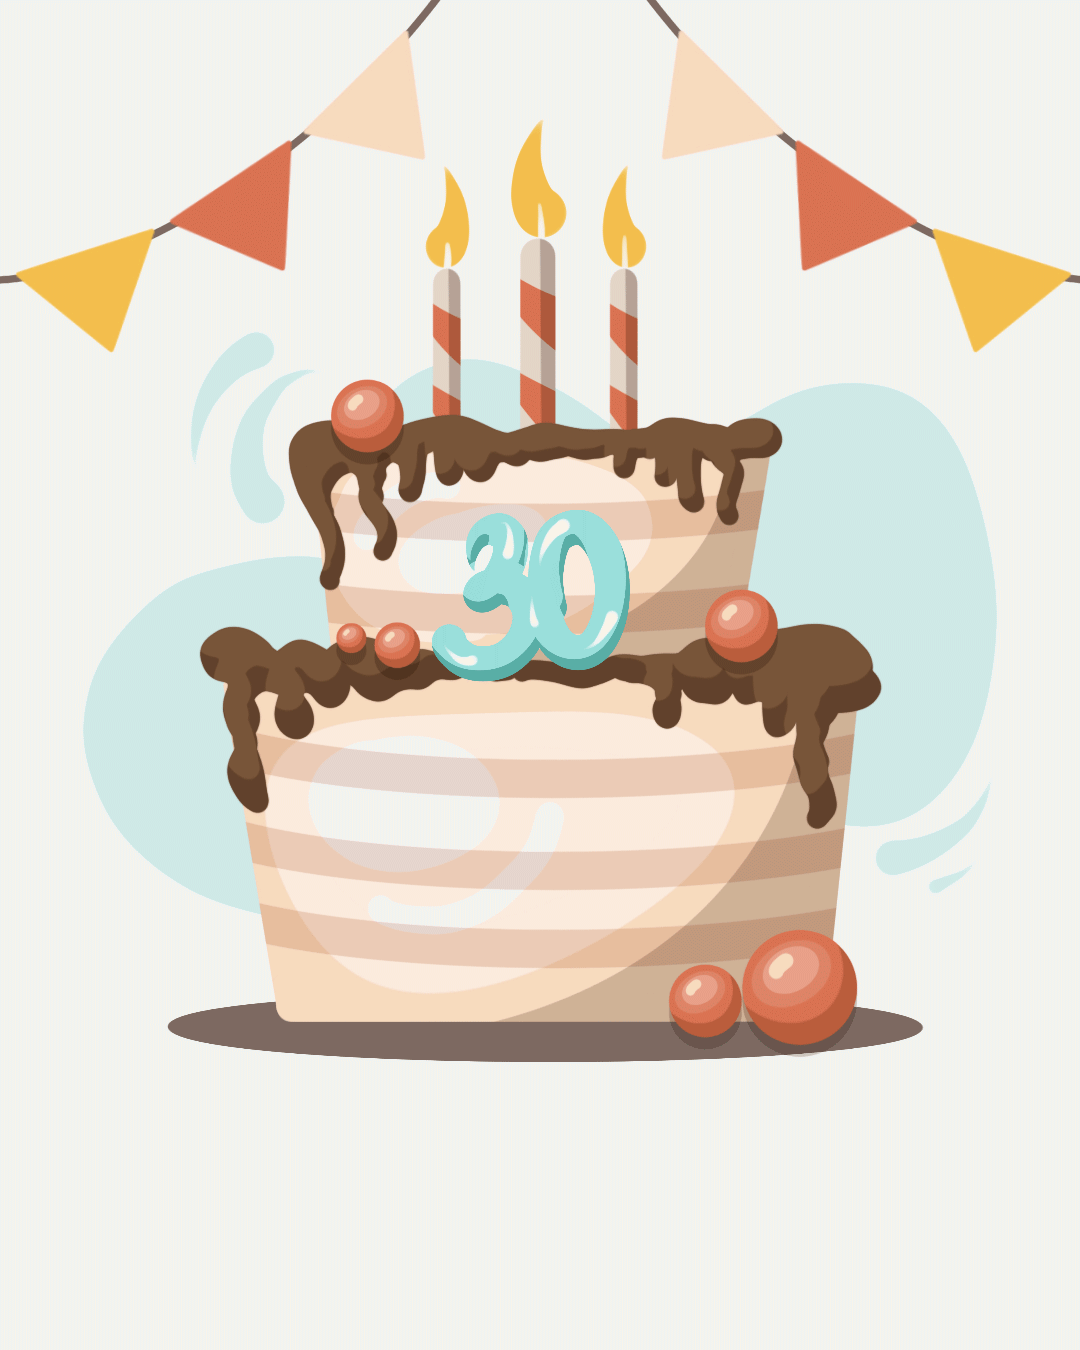 15+ Happy Birthday Cake Gifs Images Collection | Free Download